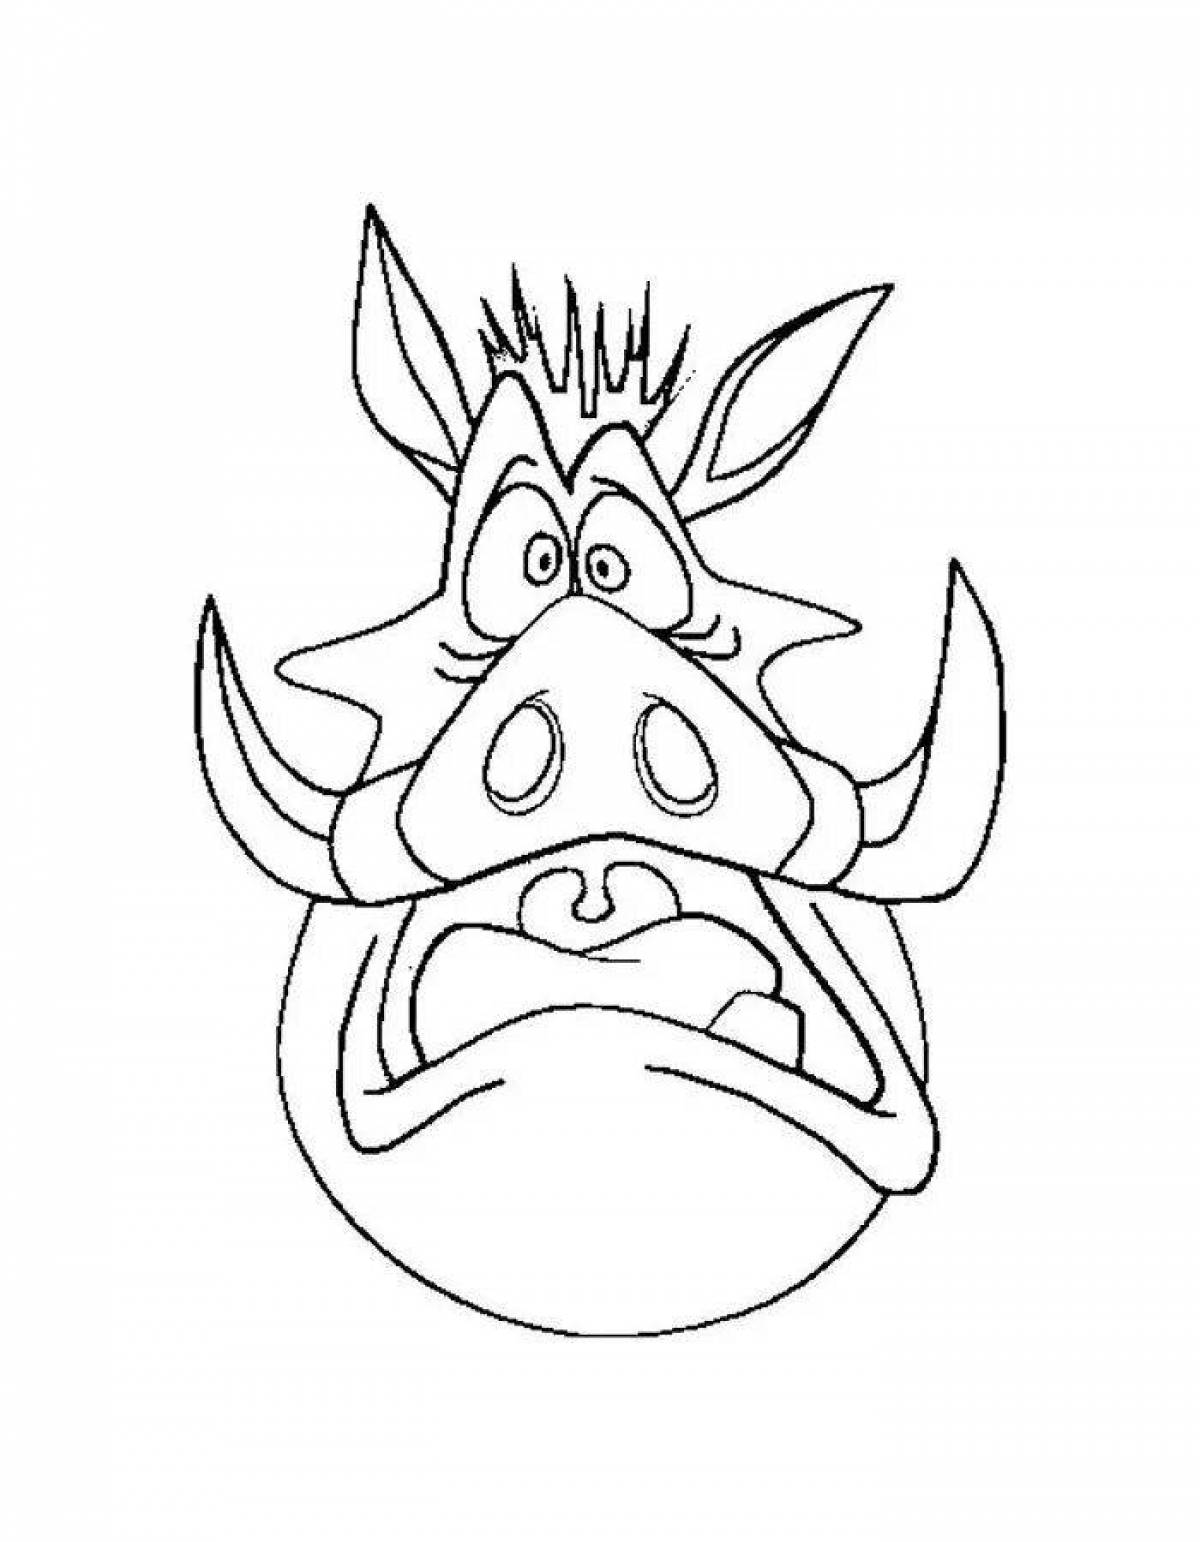 Animated pumba coloring page